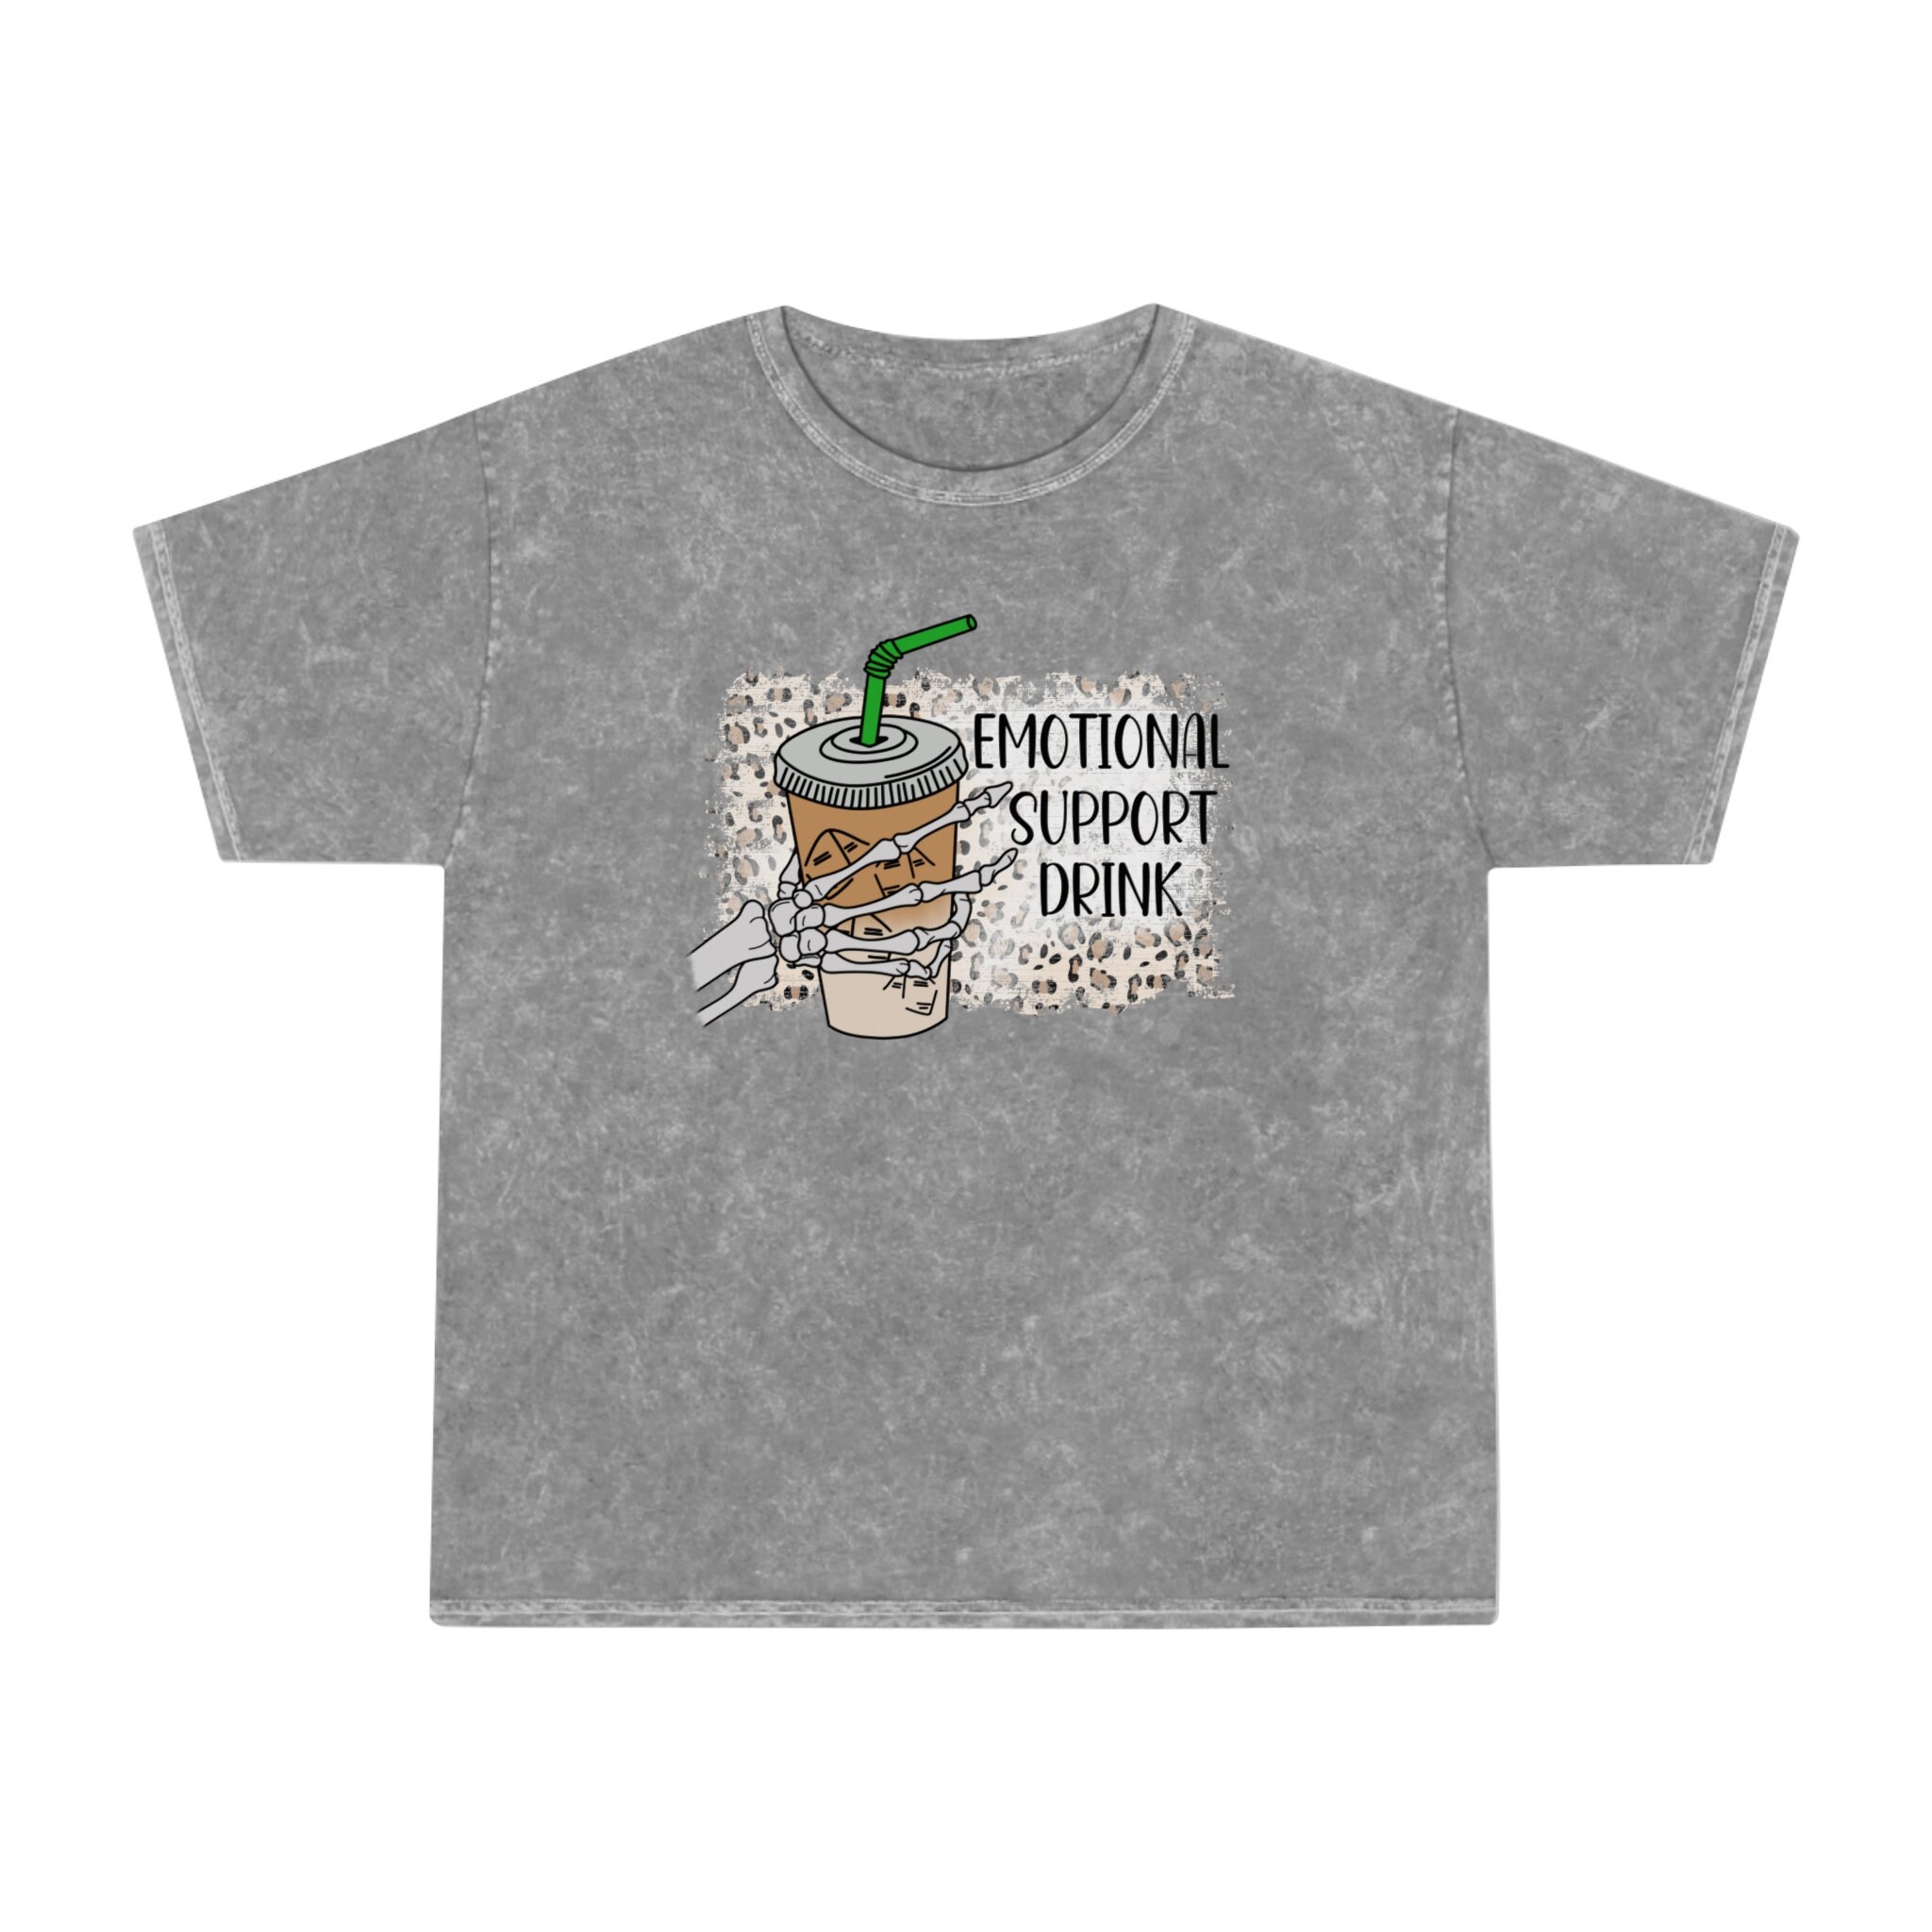 Discover Emotional Support Drink Shirt, Mineral Wash T-Shirt, Coffee Lover Gift, Dunkin Coffee